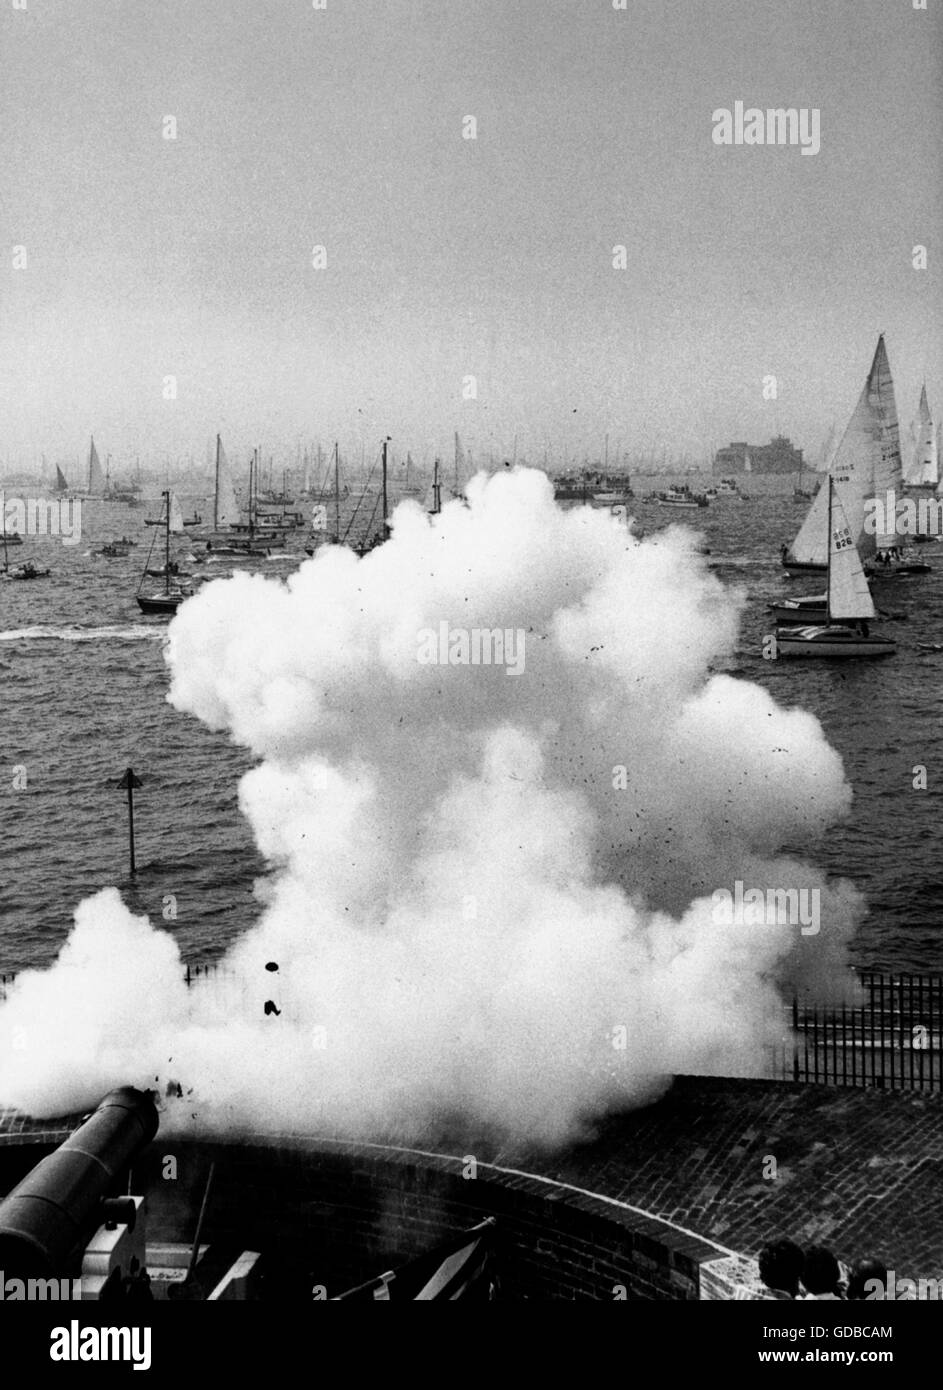 AJAX NEWS PHOTOS. 1977. SOUTHSEA, ENGLAND. - WHITBREAD ROUND THE WORLD RACE START - A HUGE CANNON IS FIRED FROM SOUTHSEA CASTLE TO START THE 2ND GLOBAL RACE.  PHOTO:RAY EASTLAND/AJAX  REF:YAR WRWR START 1977 Stock Photo